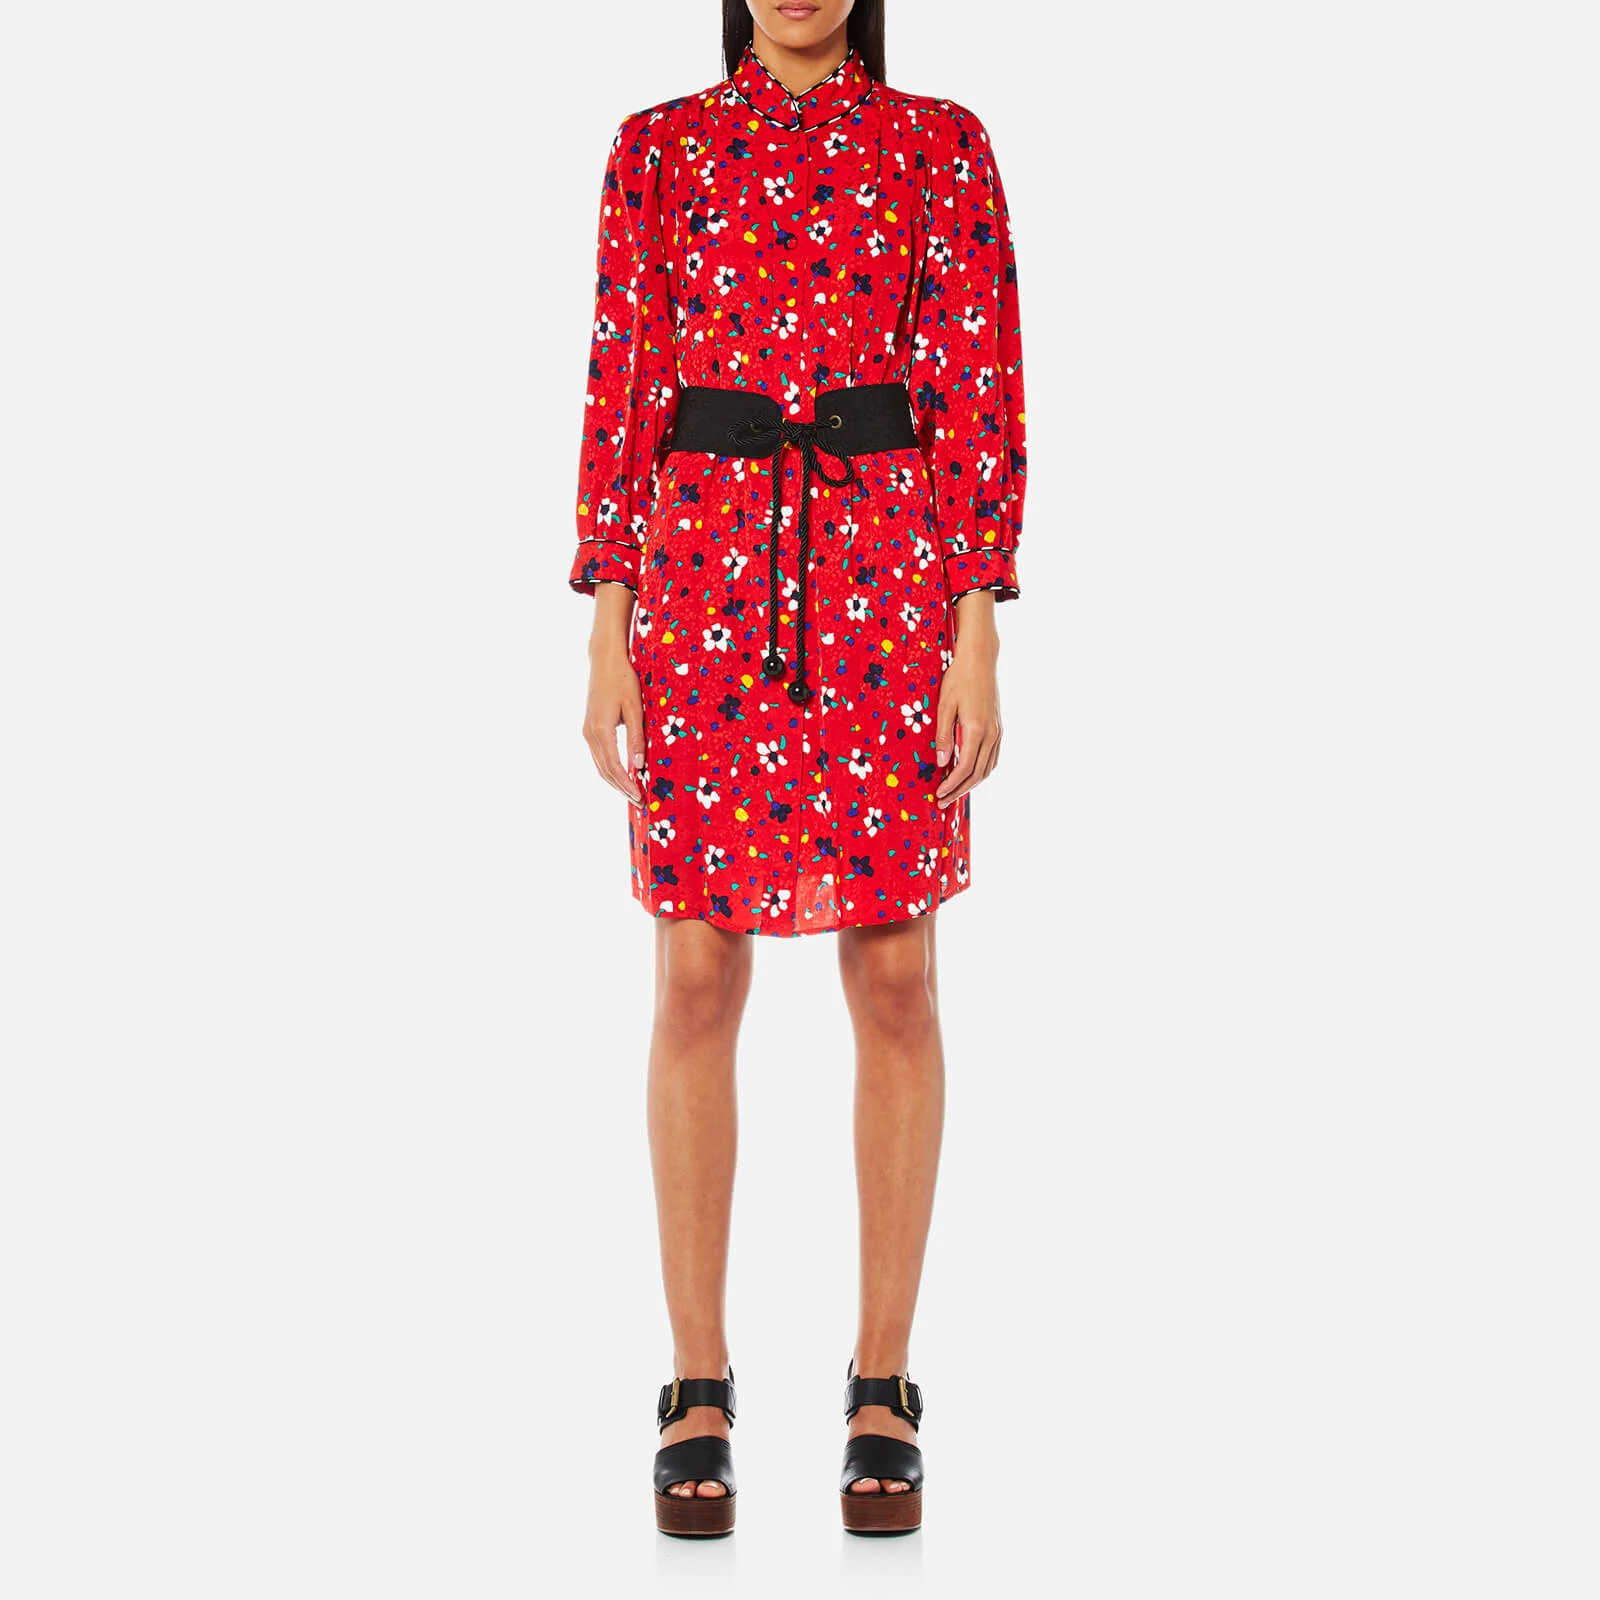 Marc Jacobs Women's Shirt Dress with Belt - Red Multi Image 1